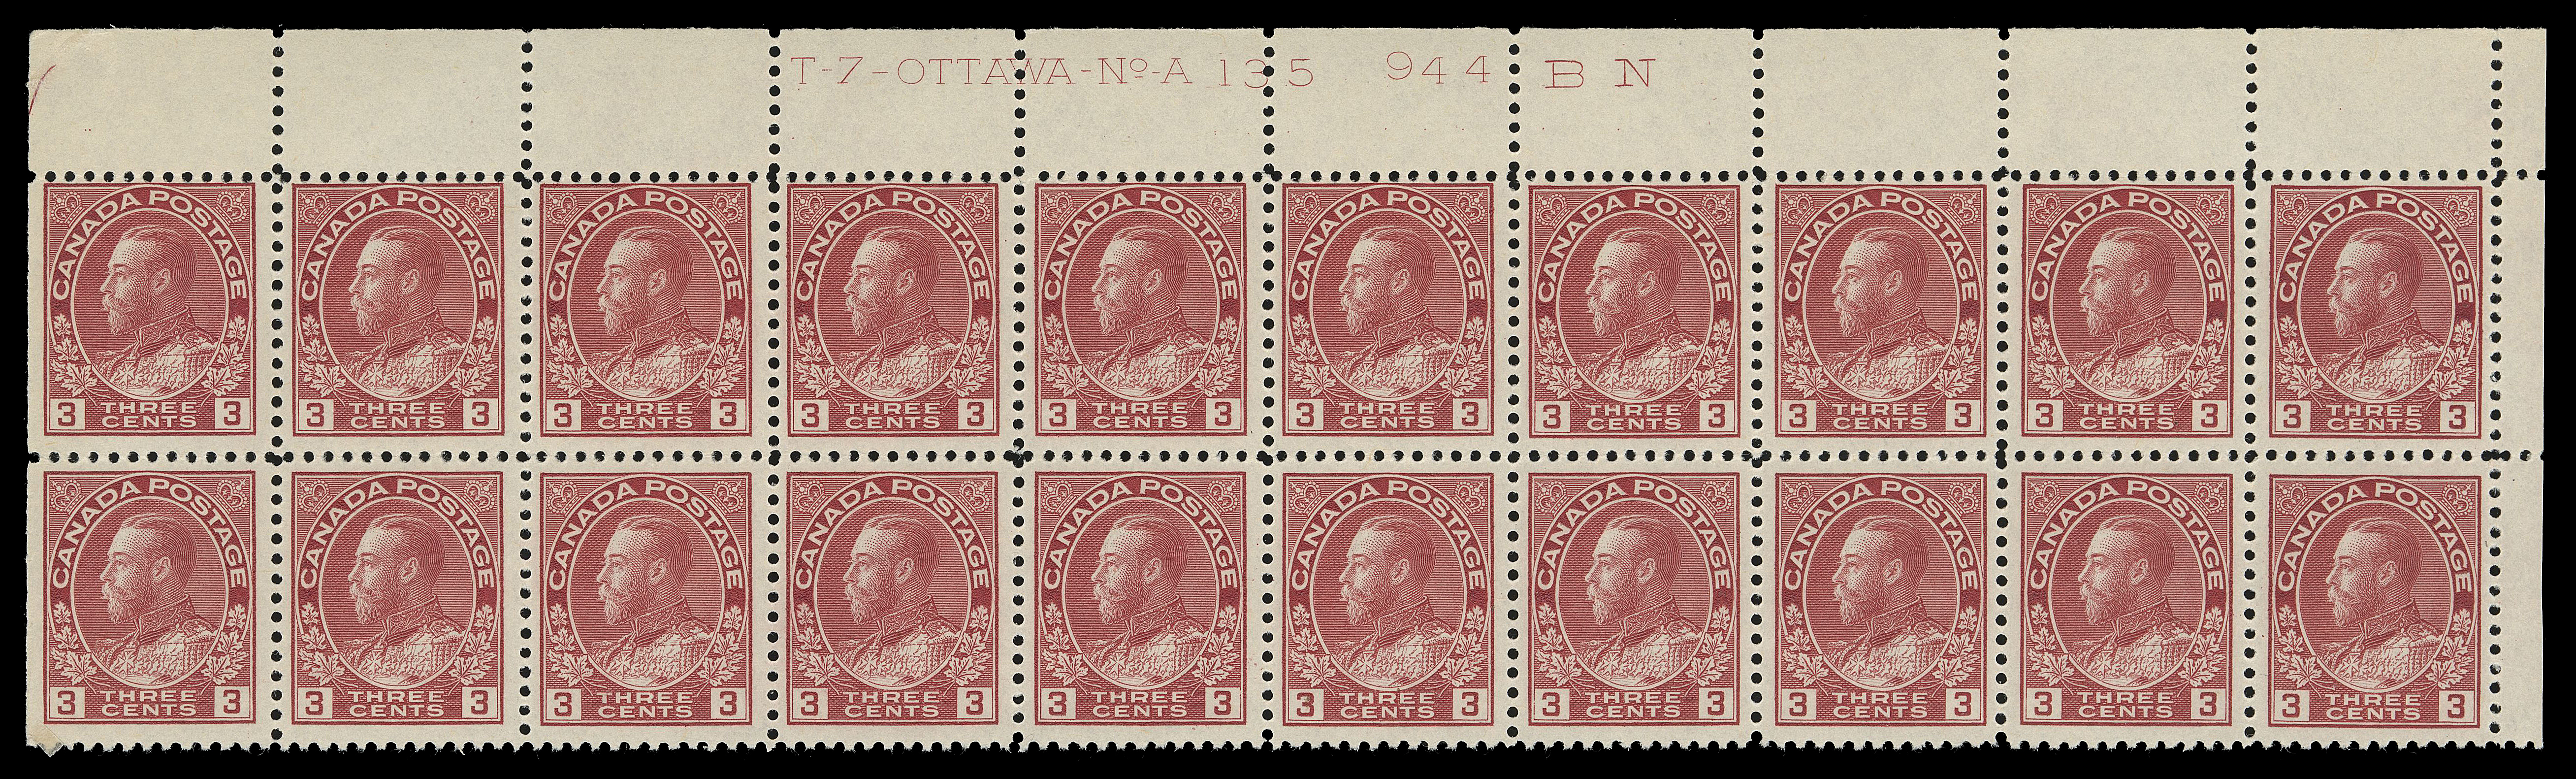 ADMIRAL STAMPS  109,A brilliant fresh, reasonably centered upper right Plate 135 strip of twenty, LH on second column stamps leaving eighteen NH, F-VF (Unitrade cat. $1,030)